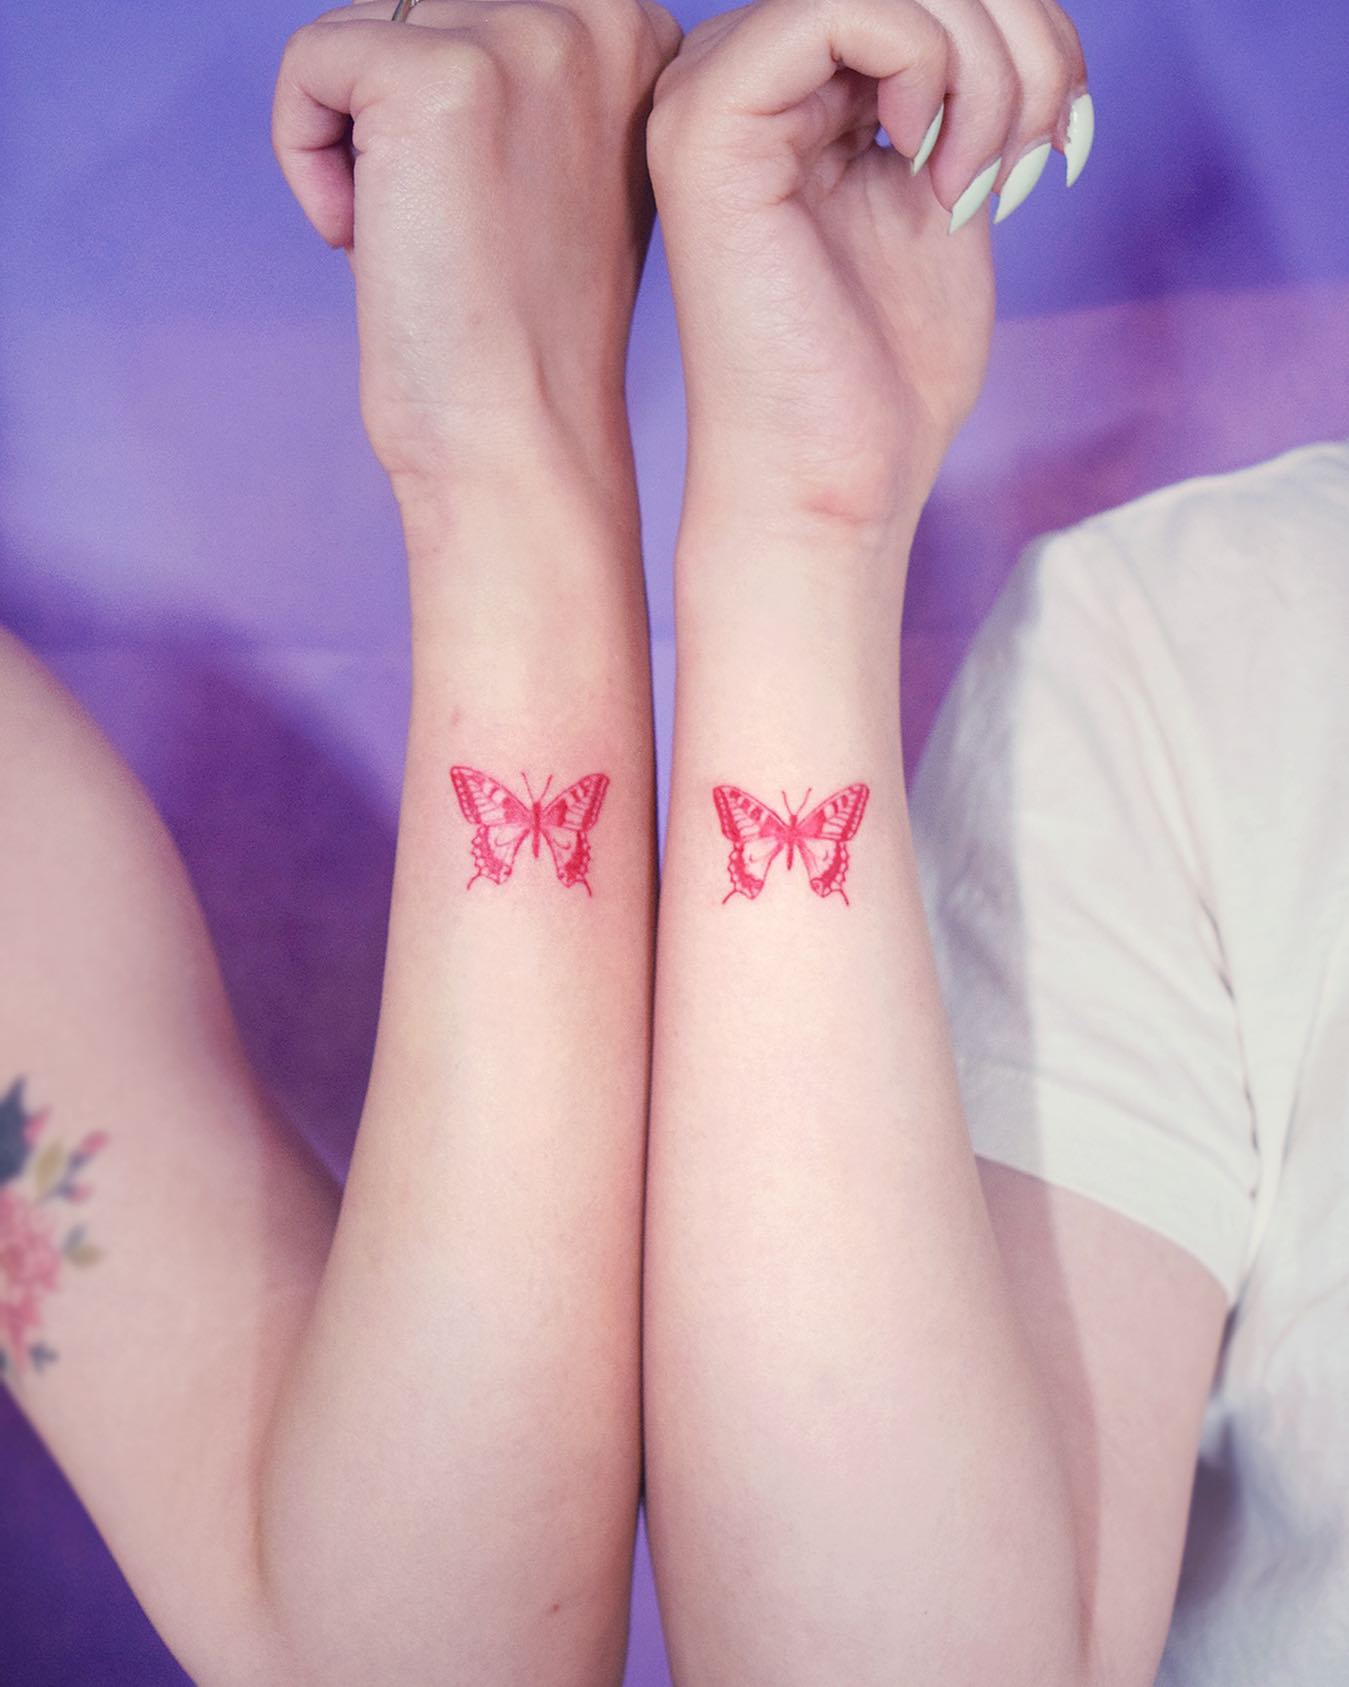 Red Tattoos: Get Inspired by Bold Designs and Symbolic Meaning